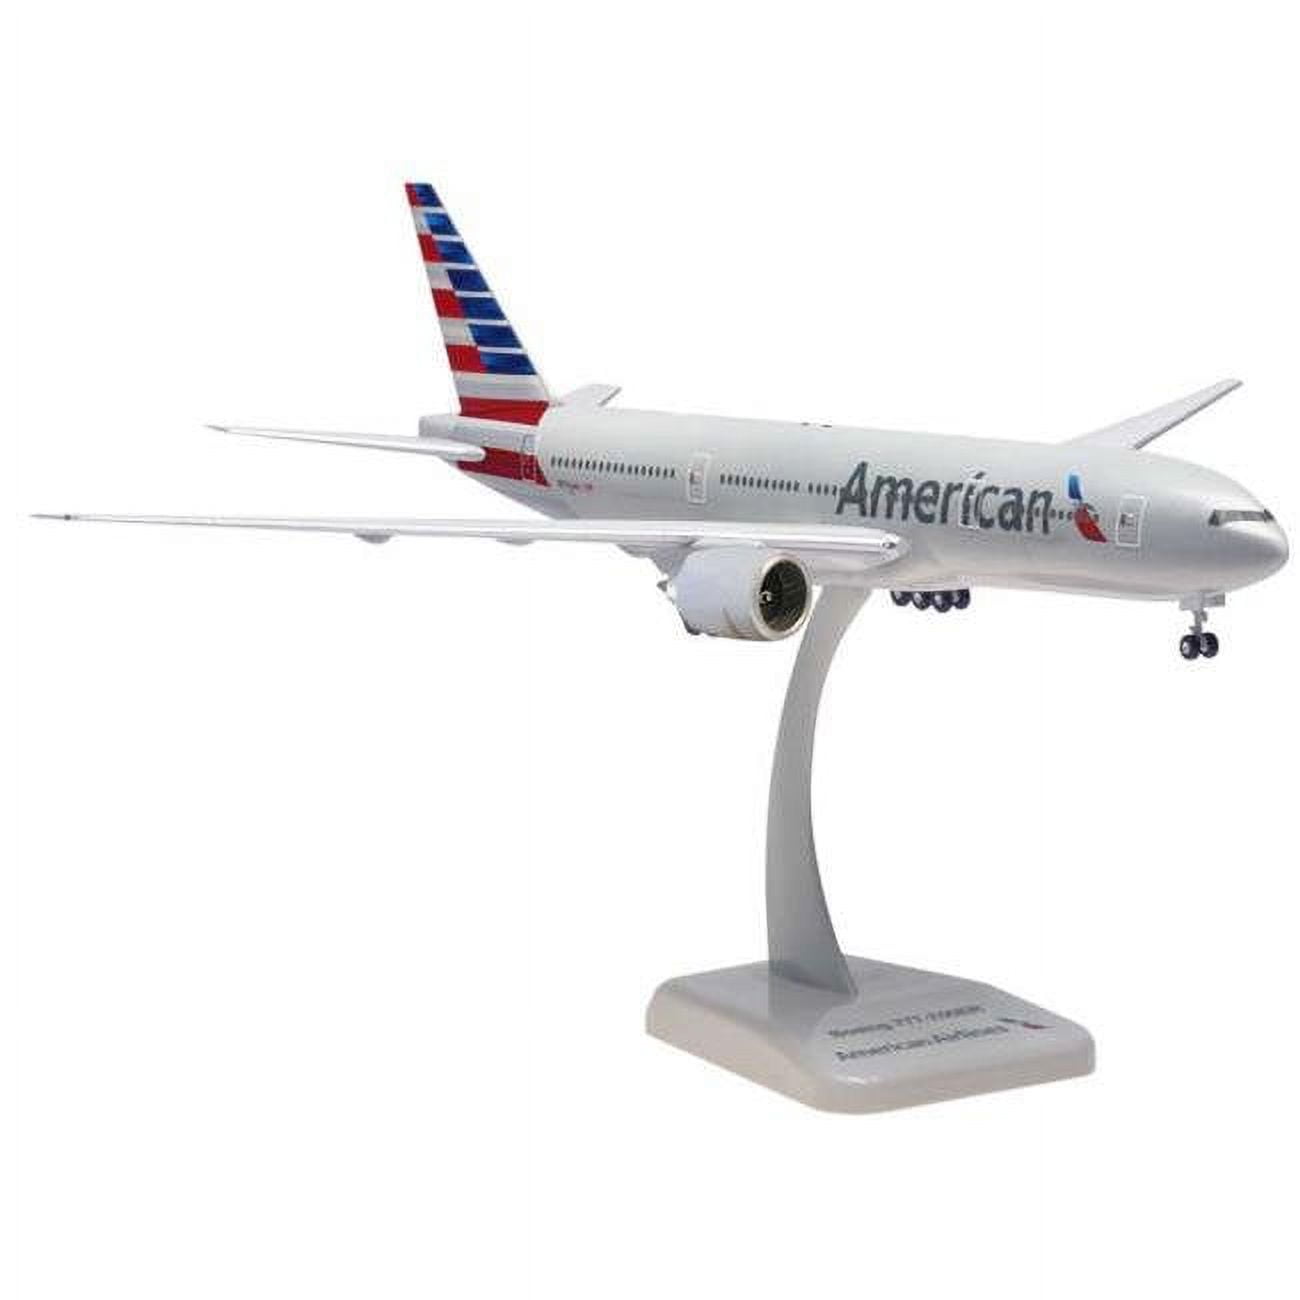 Hogan Wings Hg0052g American 777-200er Aircraft 1-200 Registration No N776an With Gear